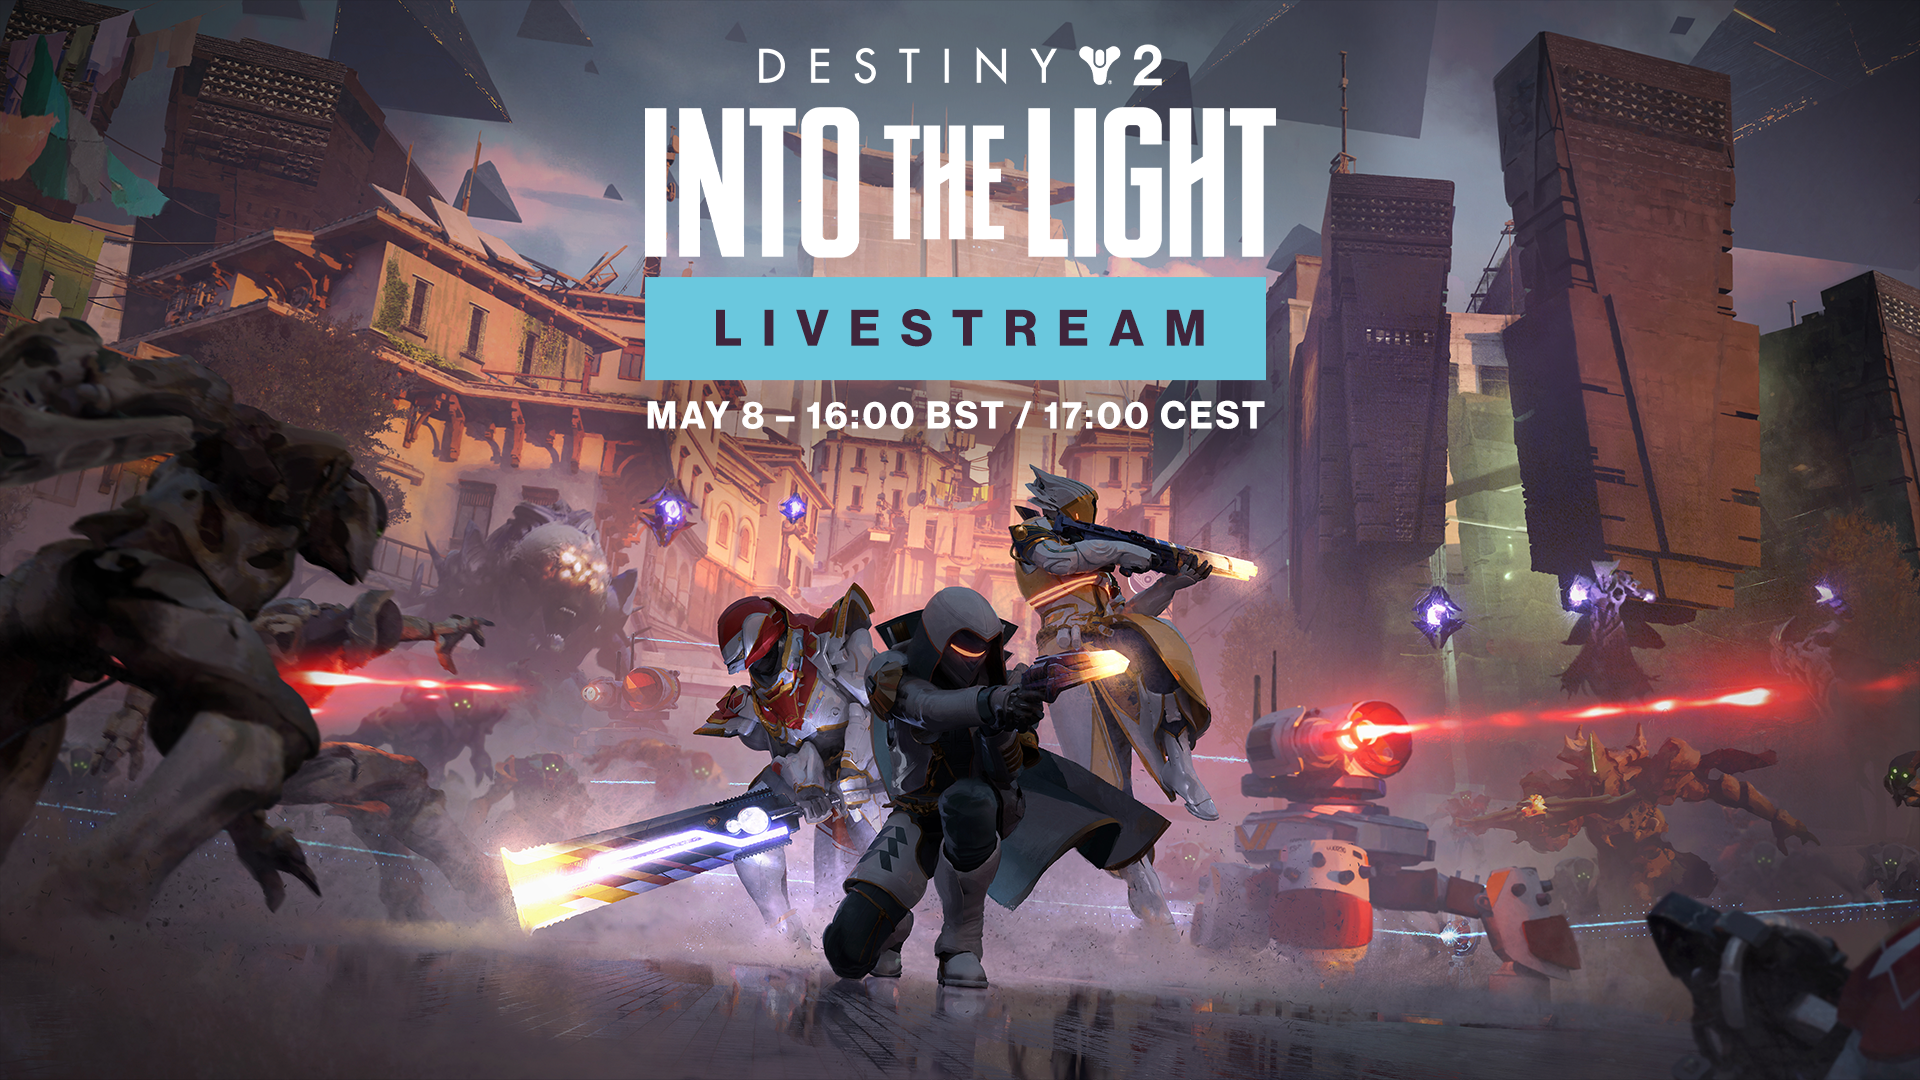 We’re going into the light in Destiny 2 in today’s GR Live – Destiny 2: Lightfall